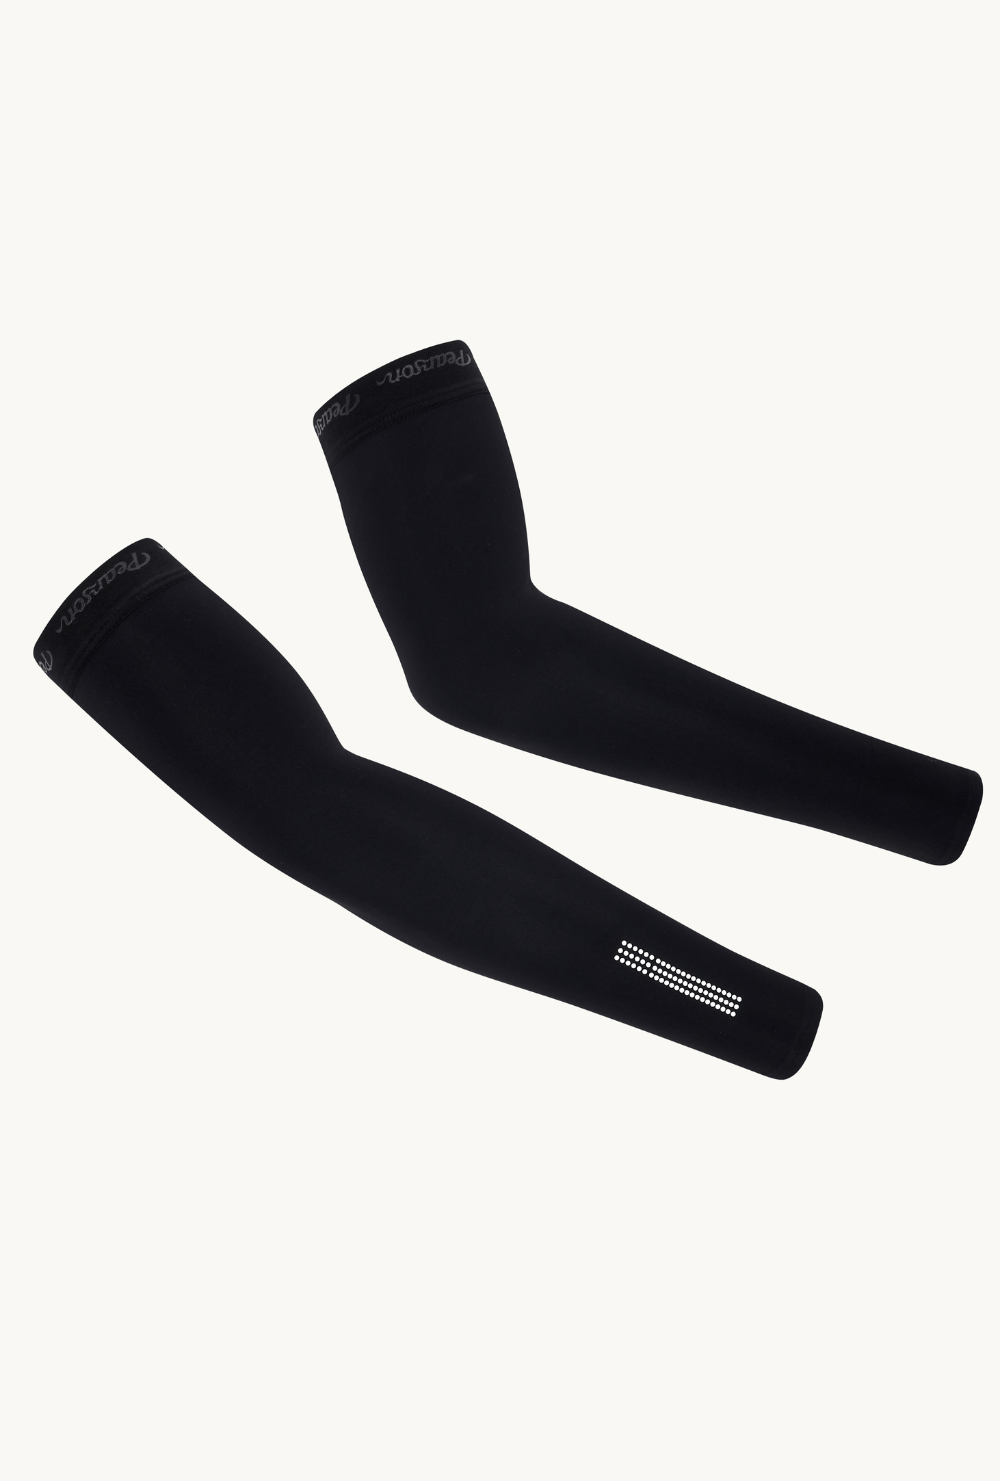 Pearson 1860  Call To Arms - Thermal Arm Warmers  Small / Black